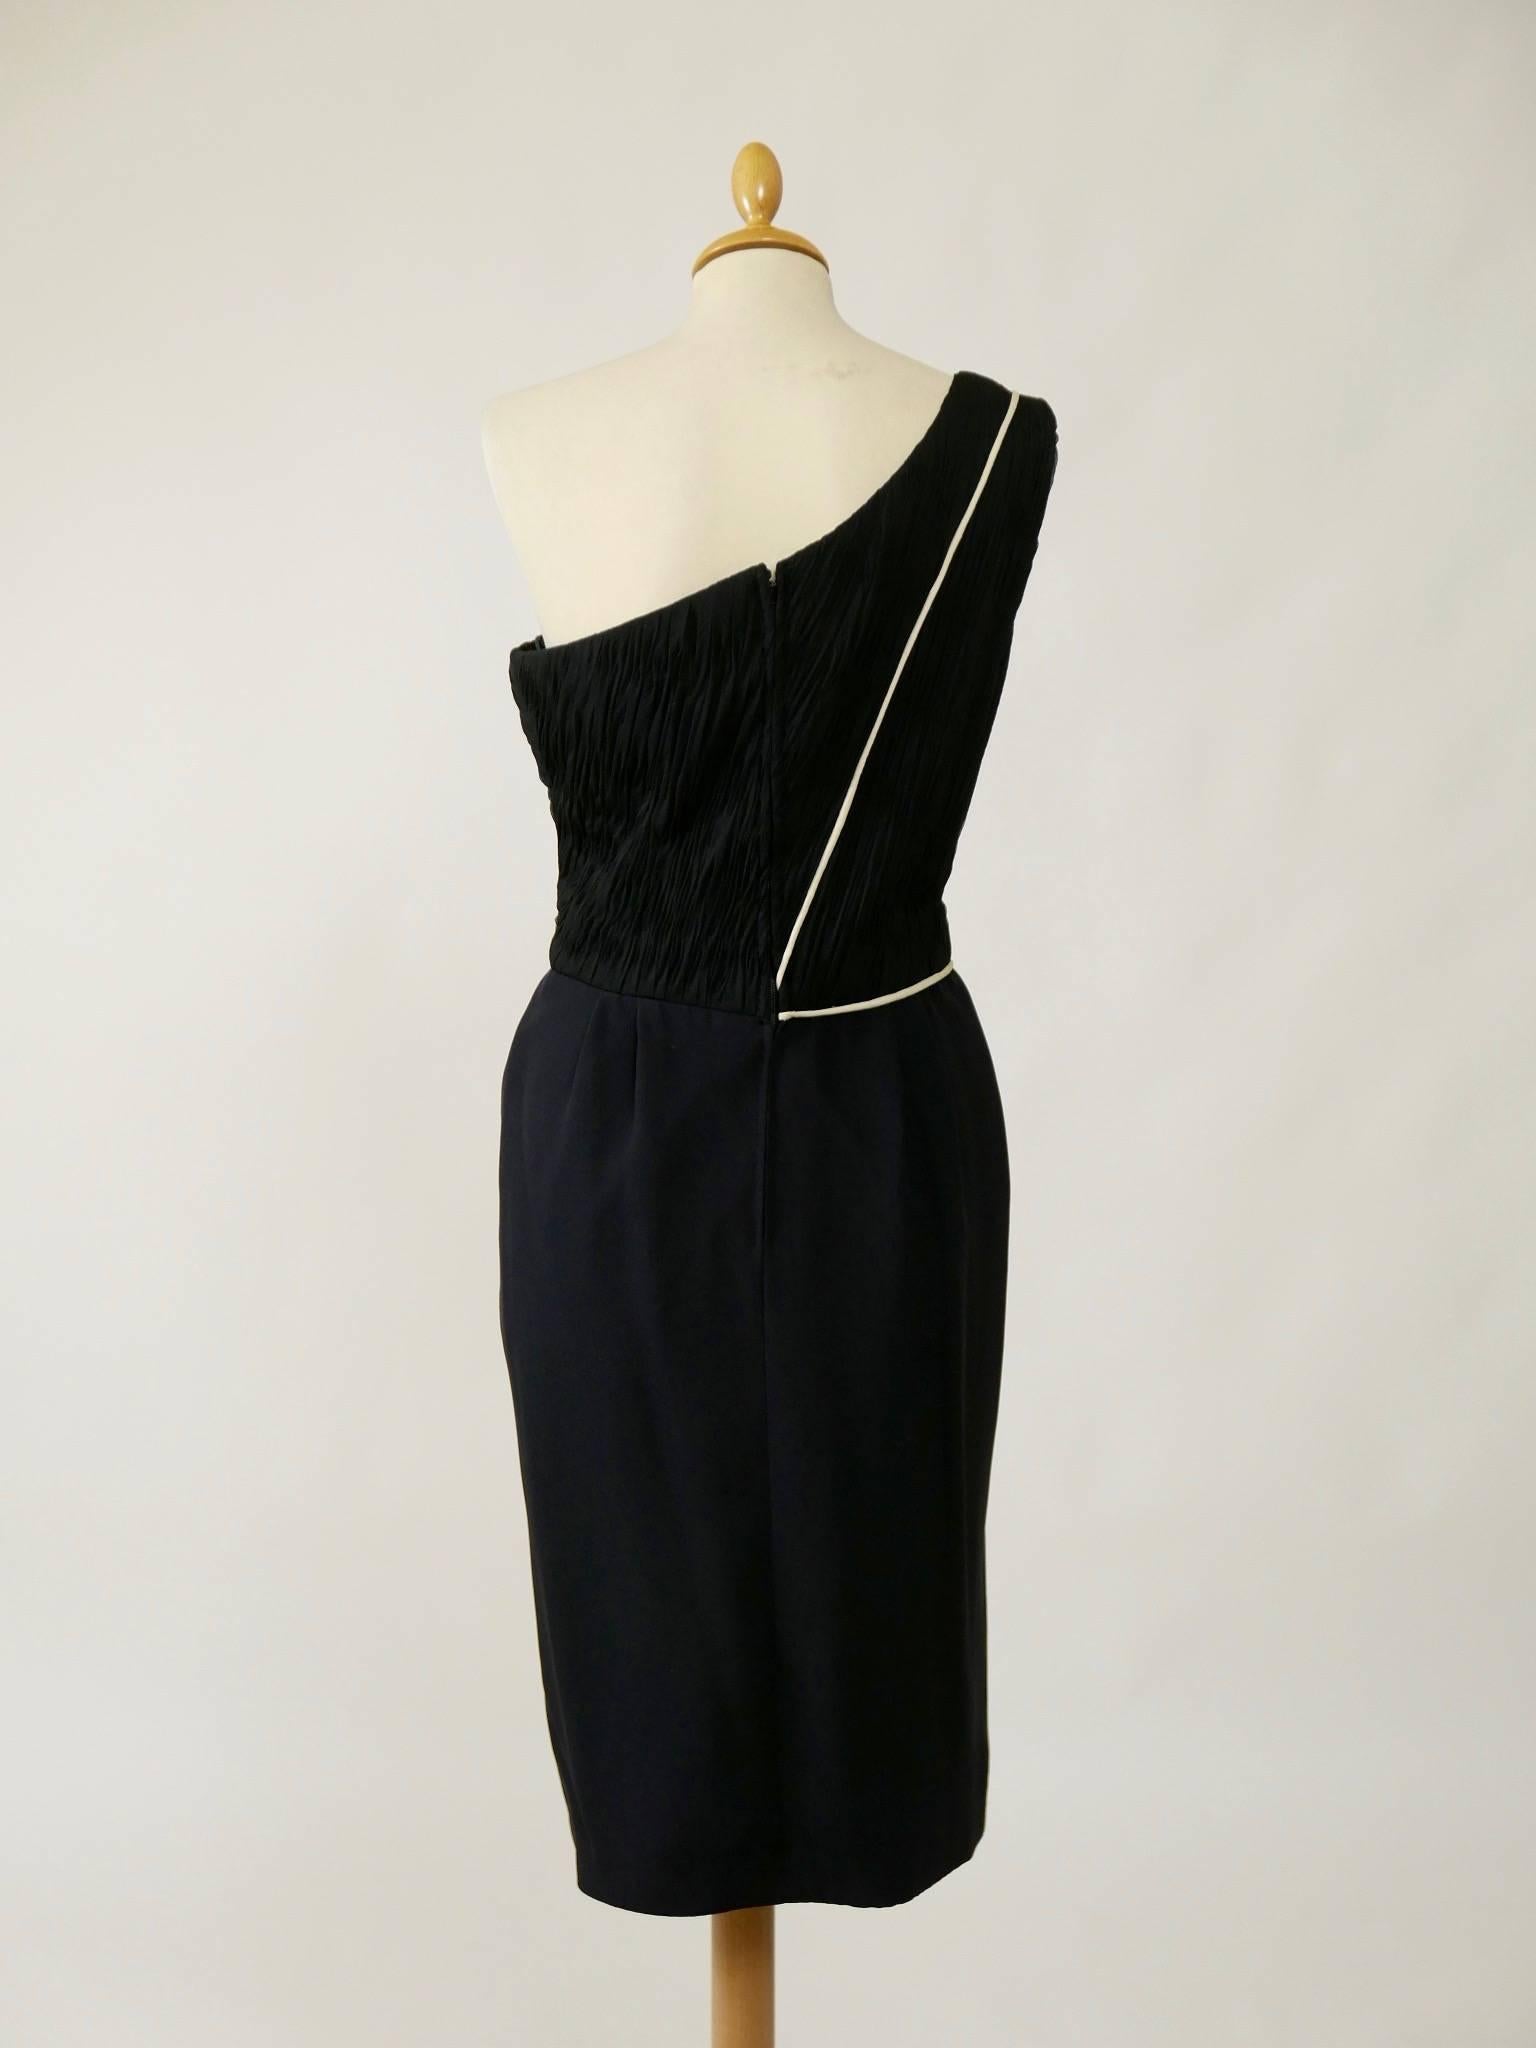 1990s RAFFAELLA CURIEL Black Pleateds One Shoulder Cocktail Dress In Excellent Condition For Sale In Milan, Italy